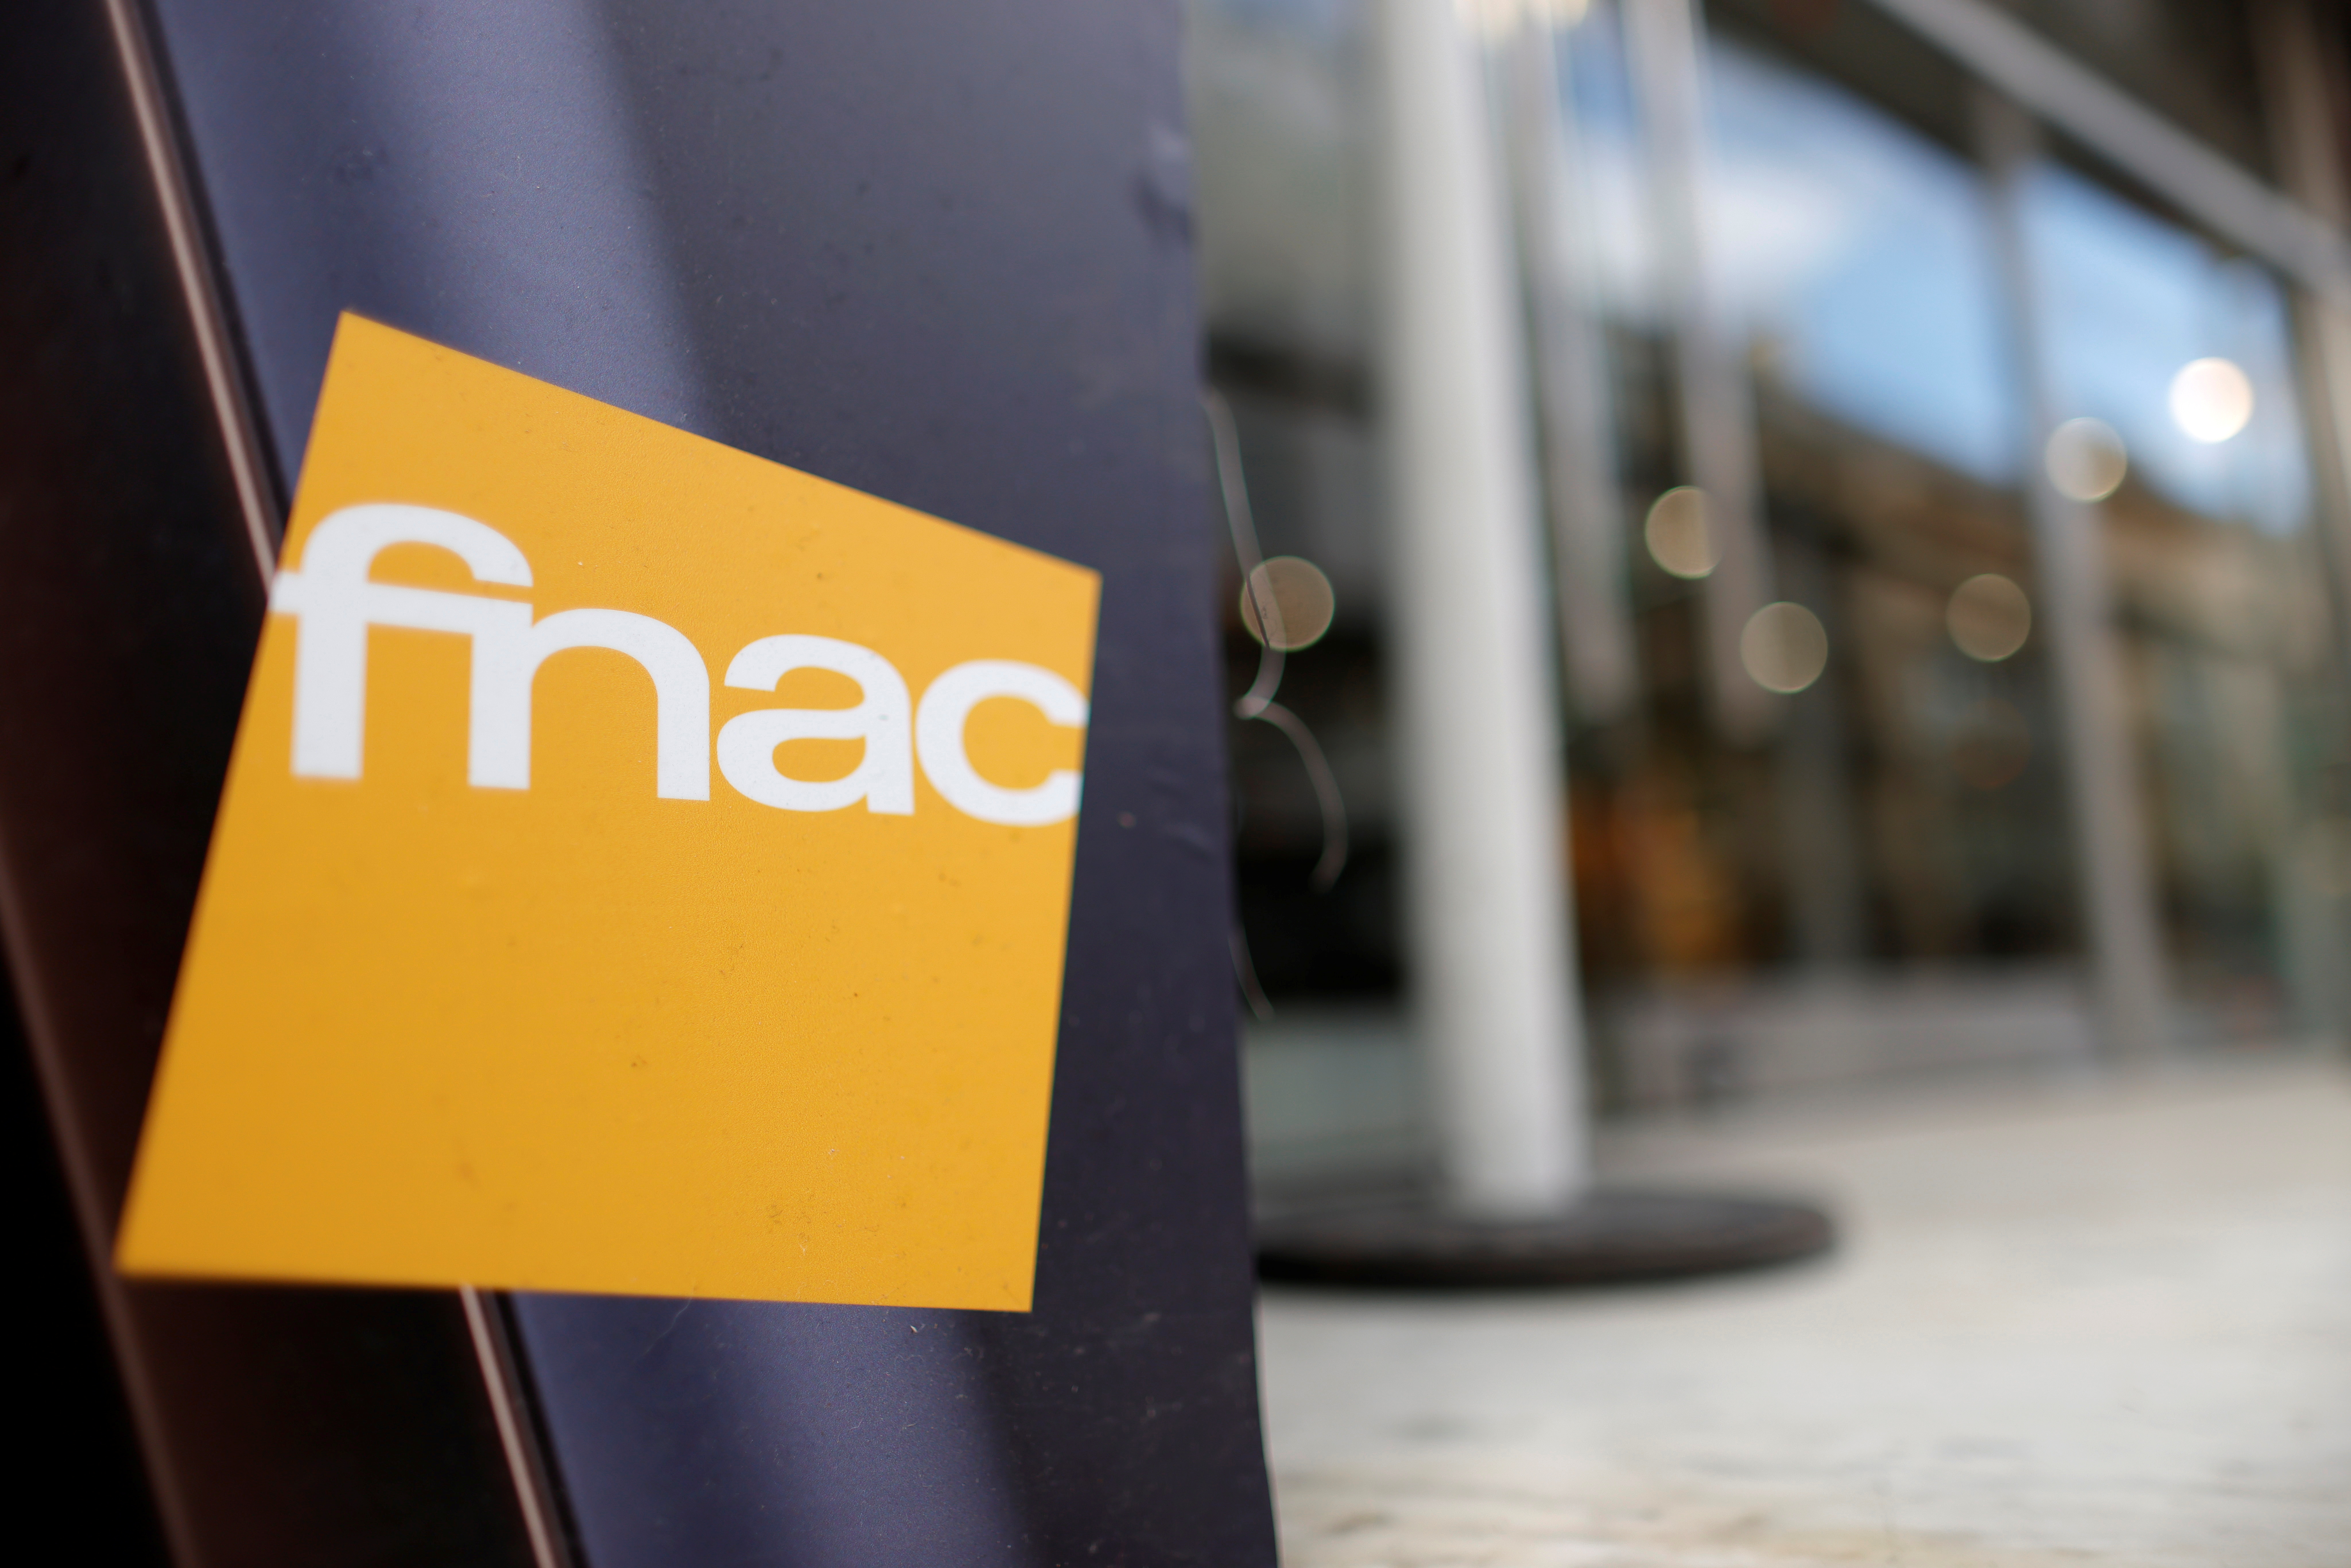 The logo of the retail chain Fnac in Paris